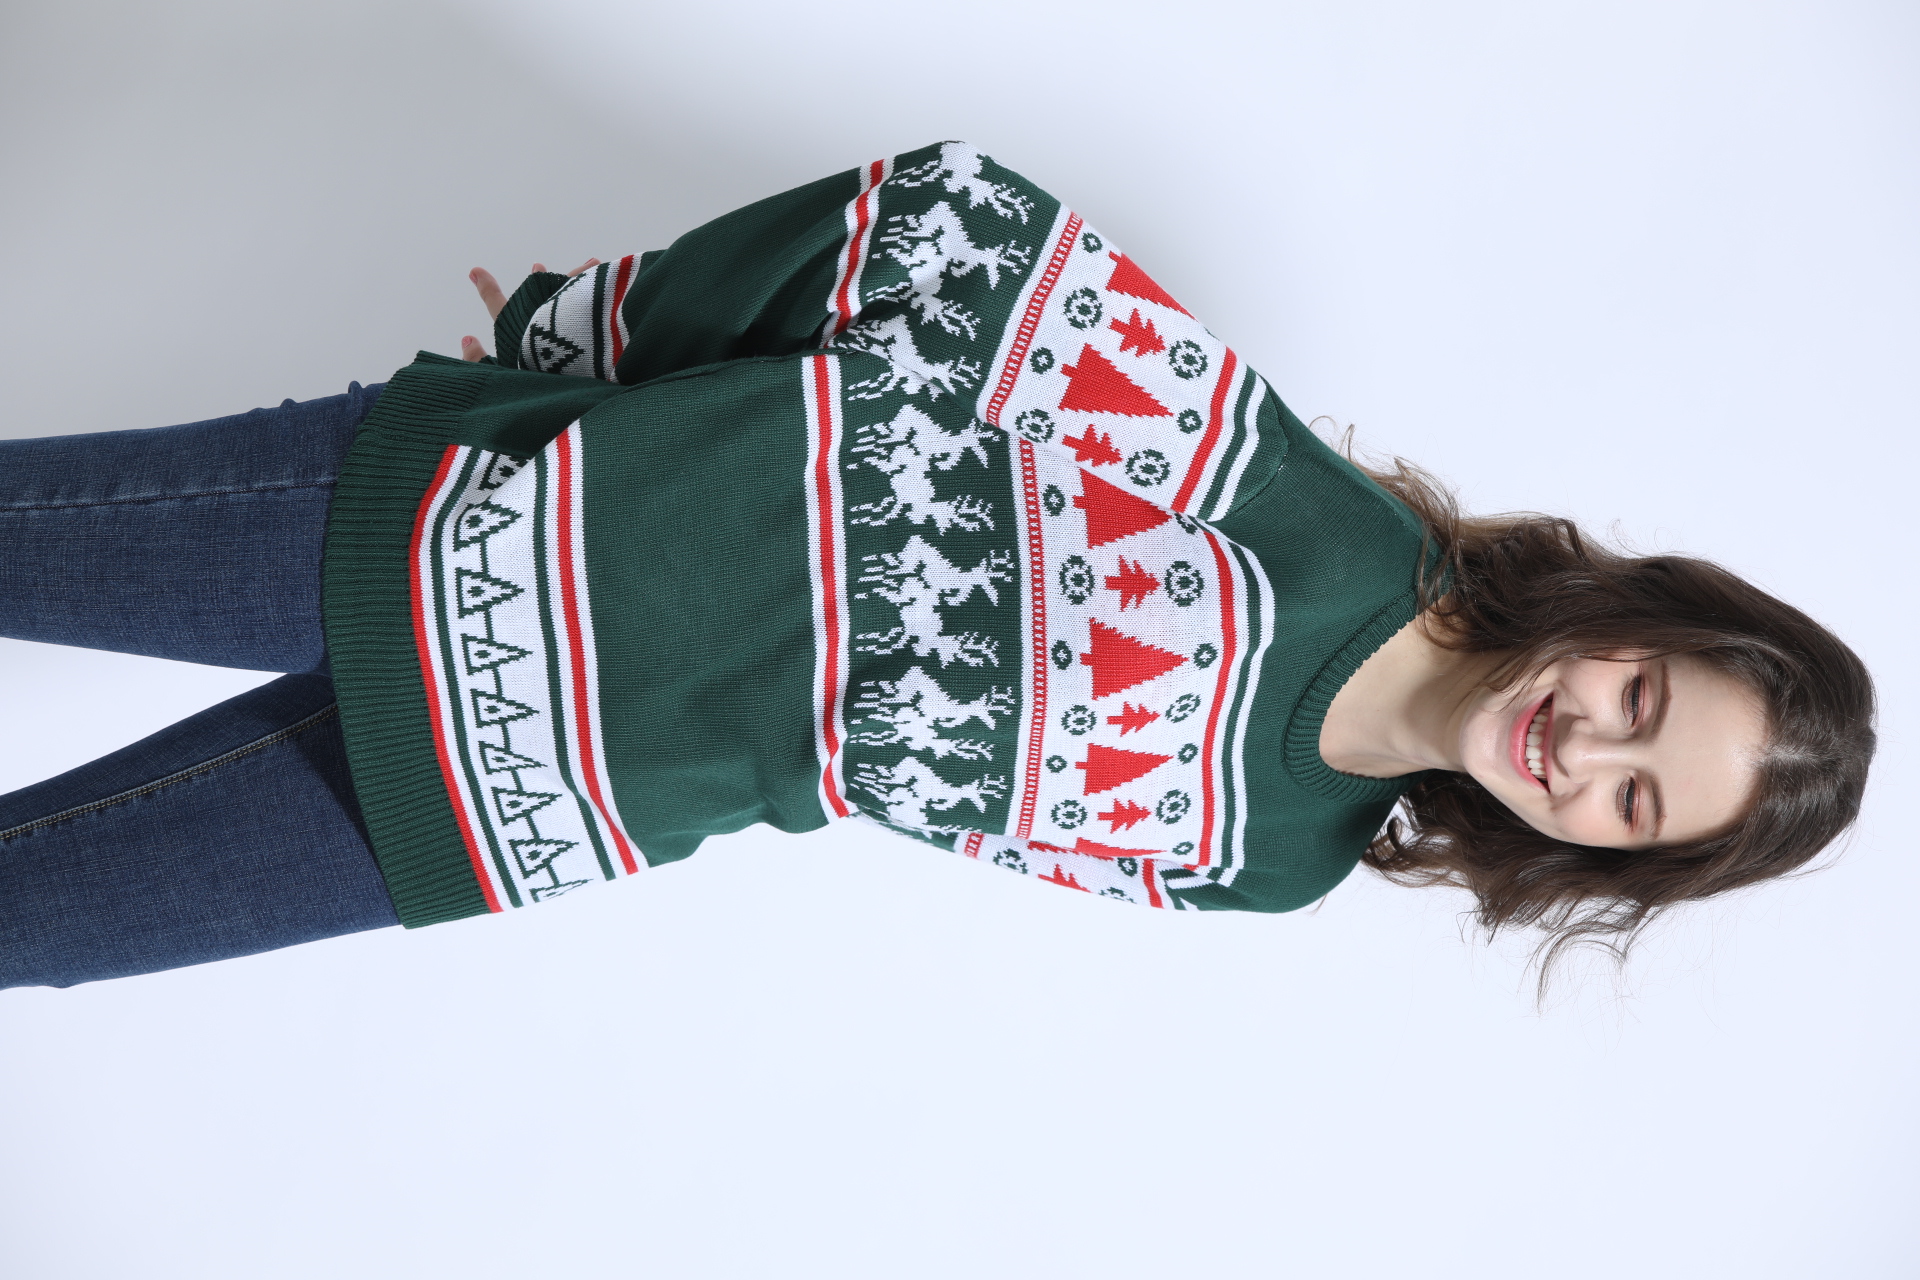 ugly christmas sweater custom wholesale christmas sweater for adults